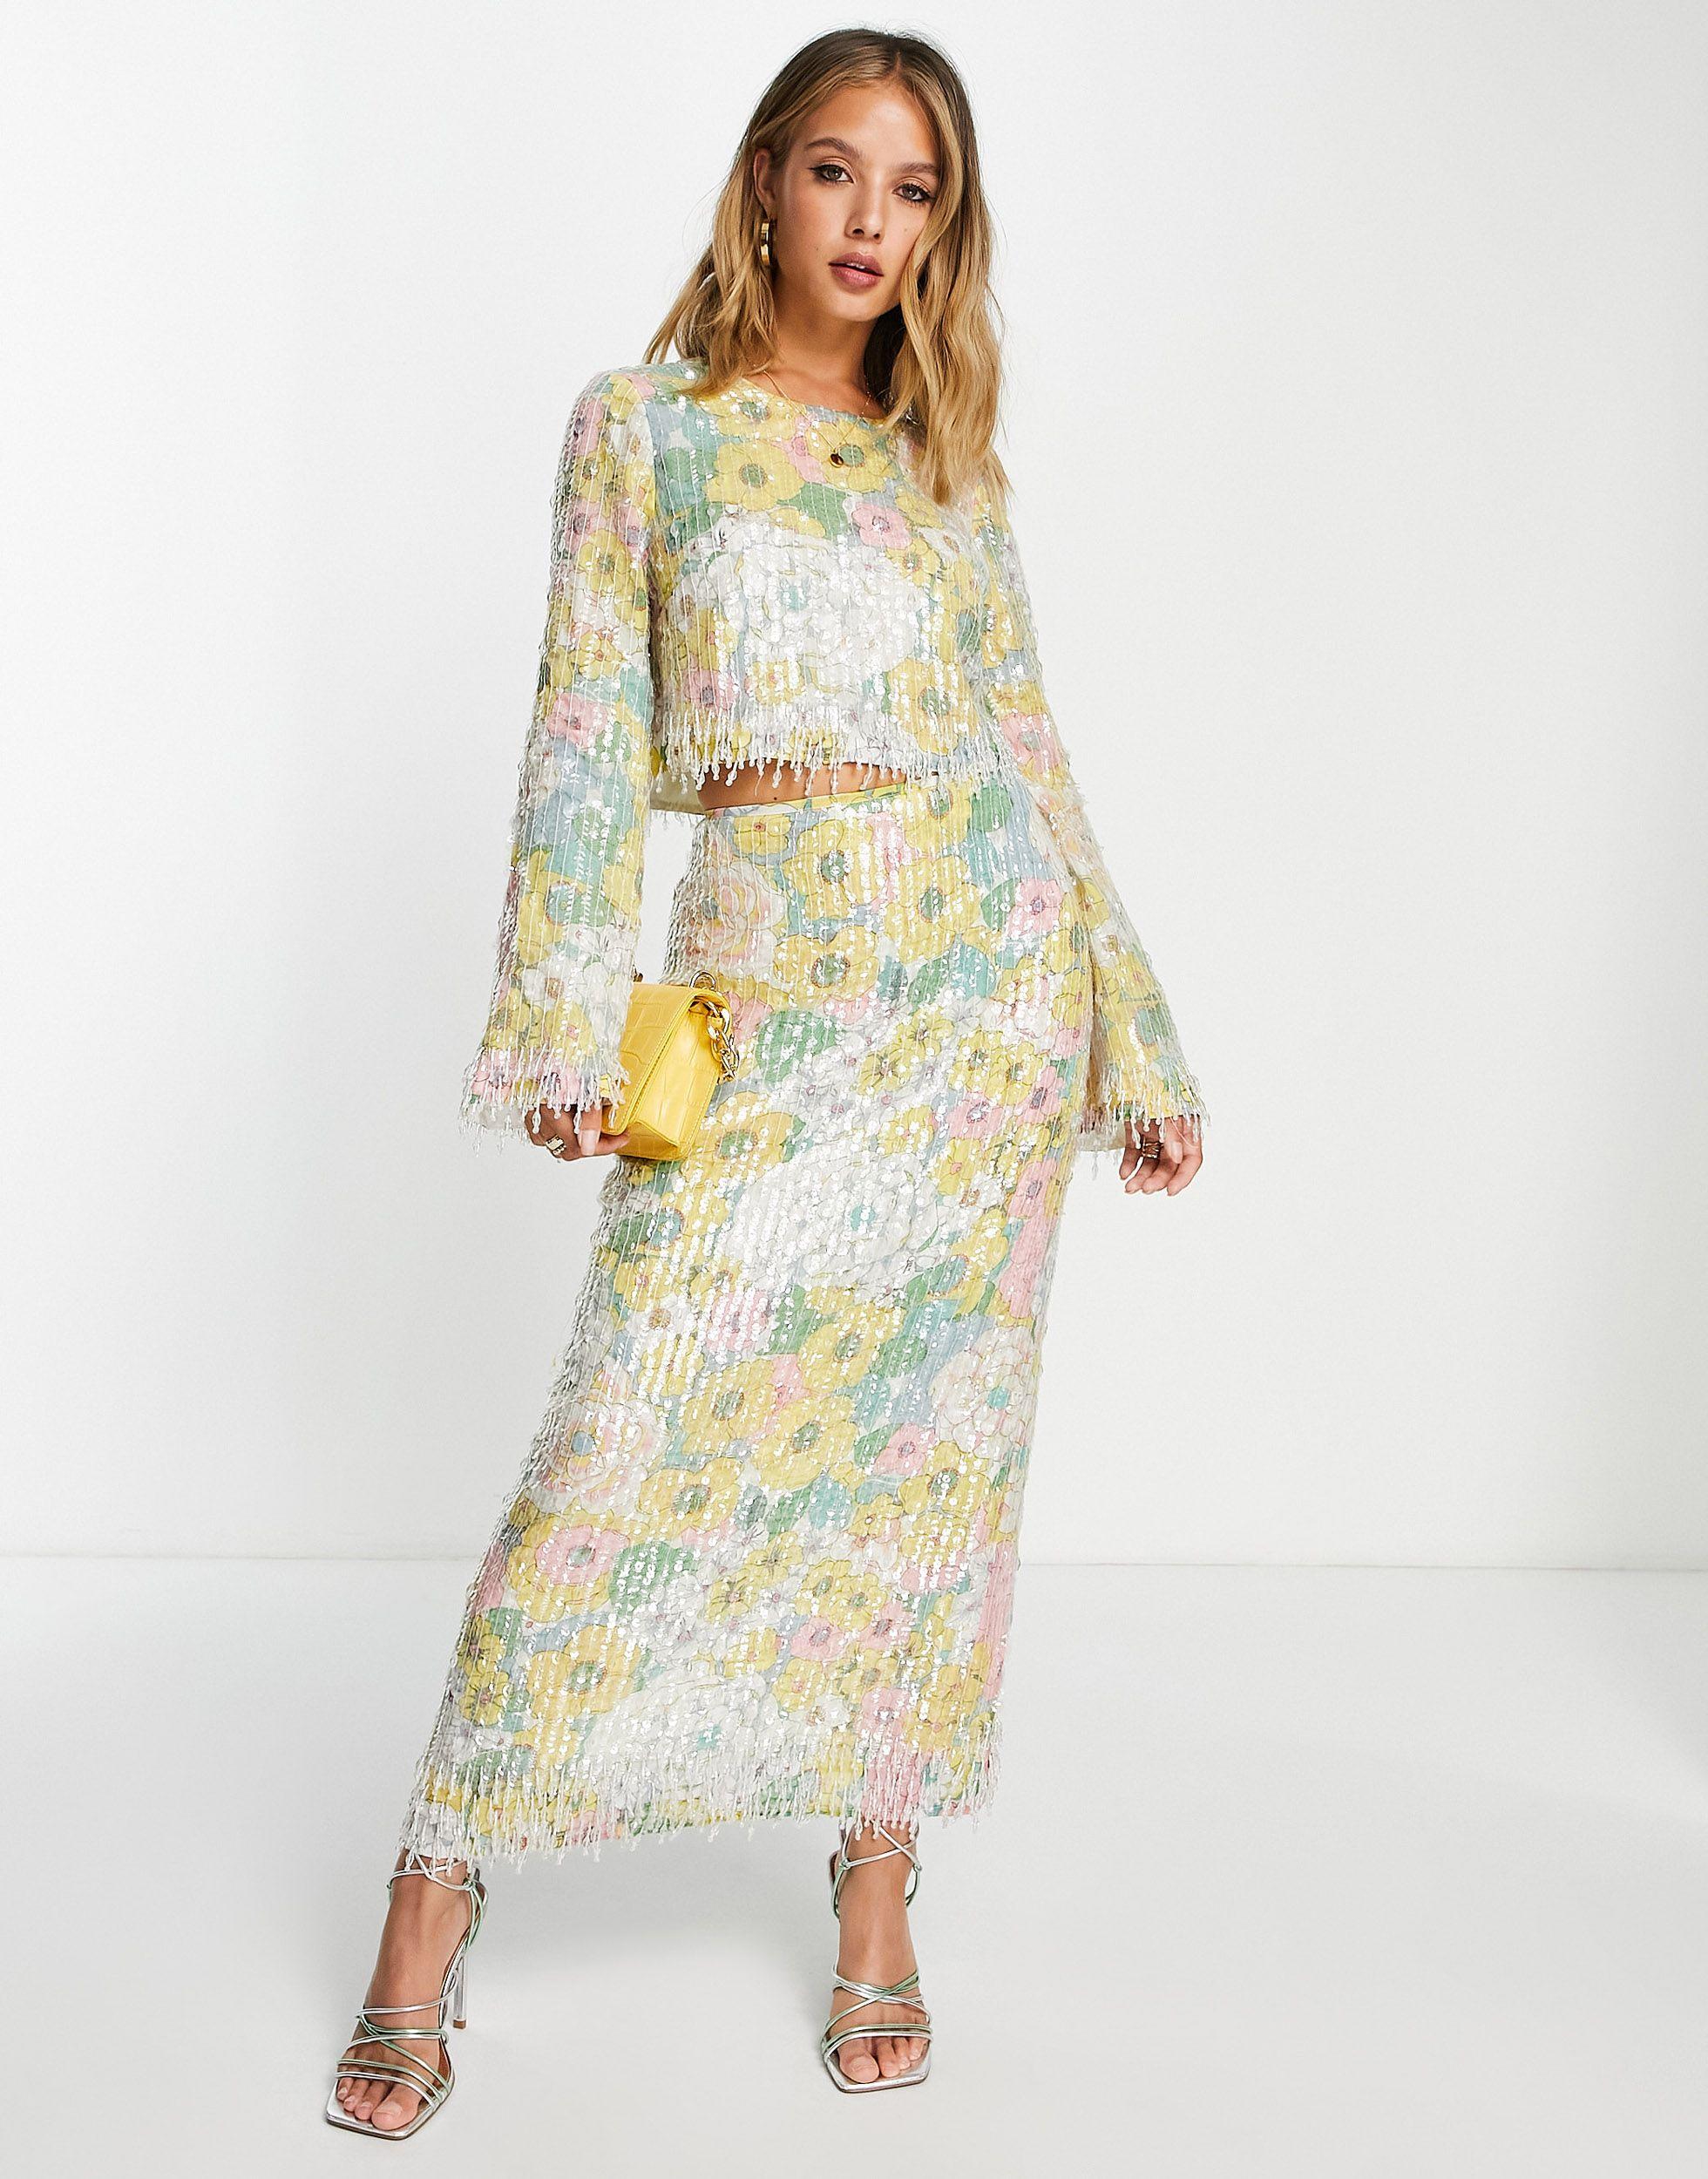 ASOS Pastel Floral Print And Sequin Midi Skirt With Fringe | Lyst